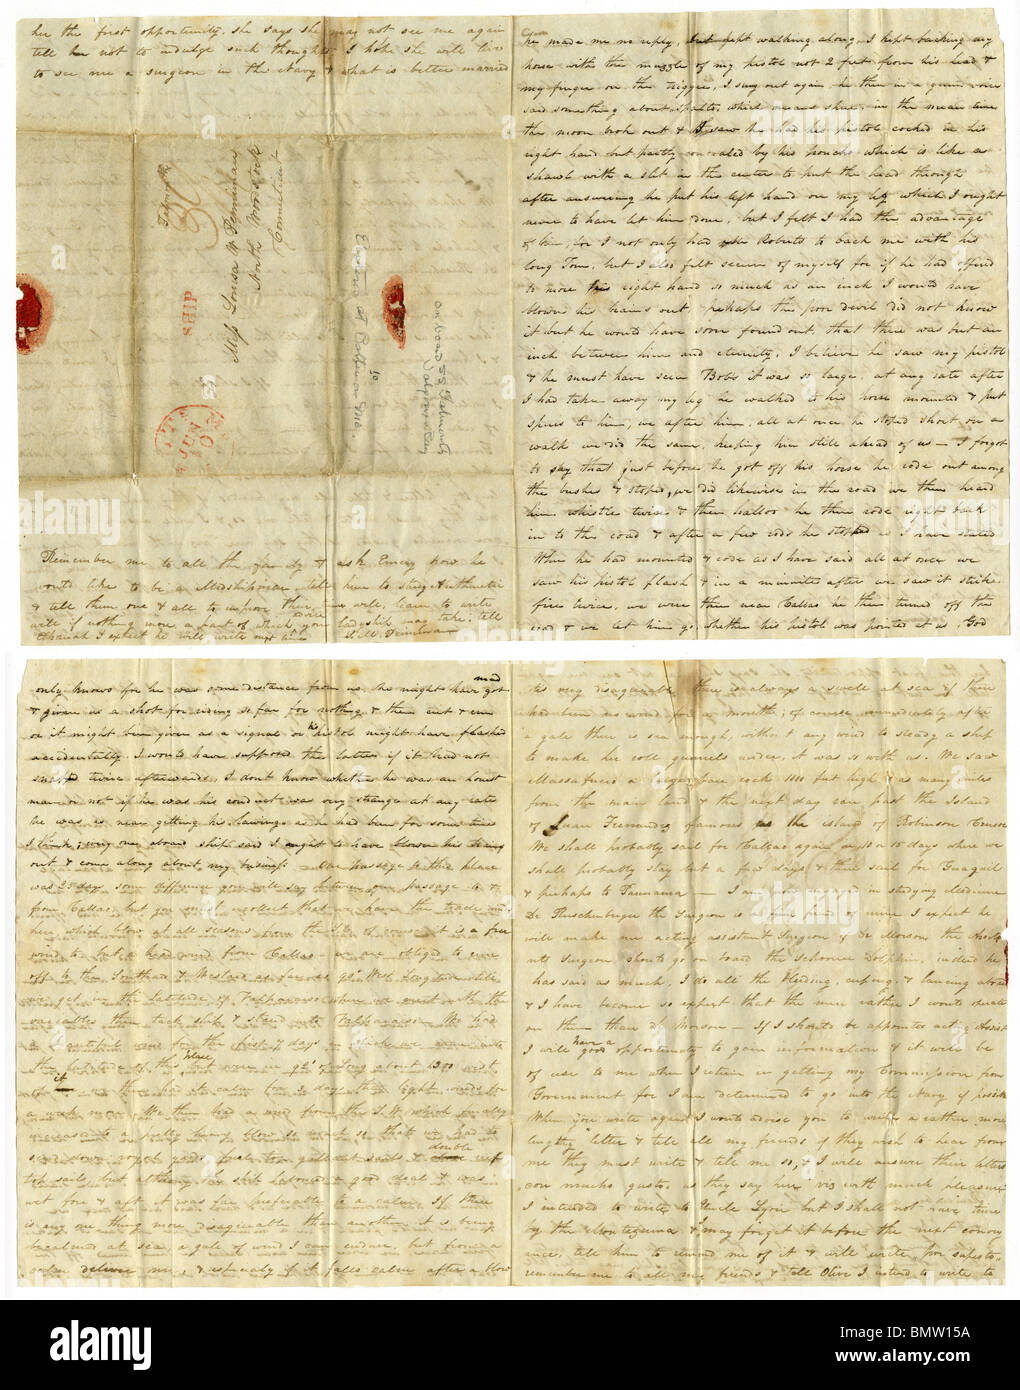 1832 stampless letter written 'on board the U.S. Ship Falmouth, Valparaiso Bay, February 19, 1832.' Stock Photo